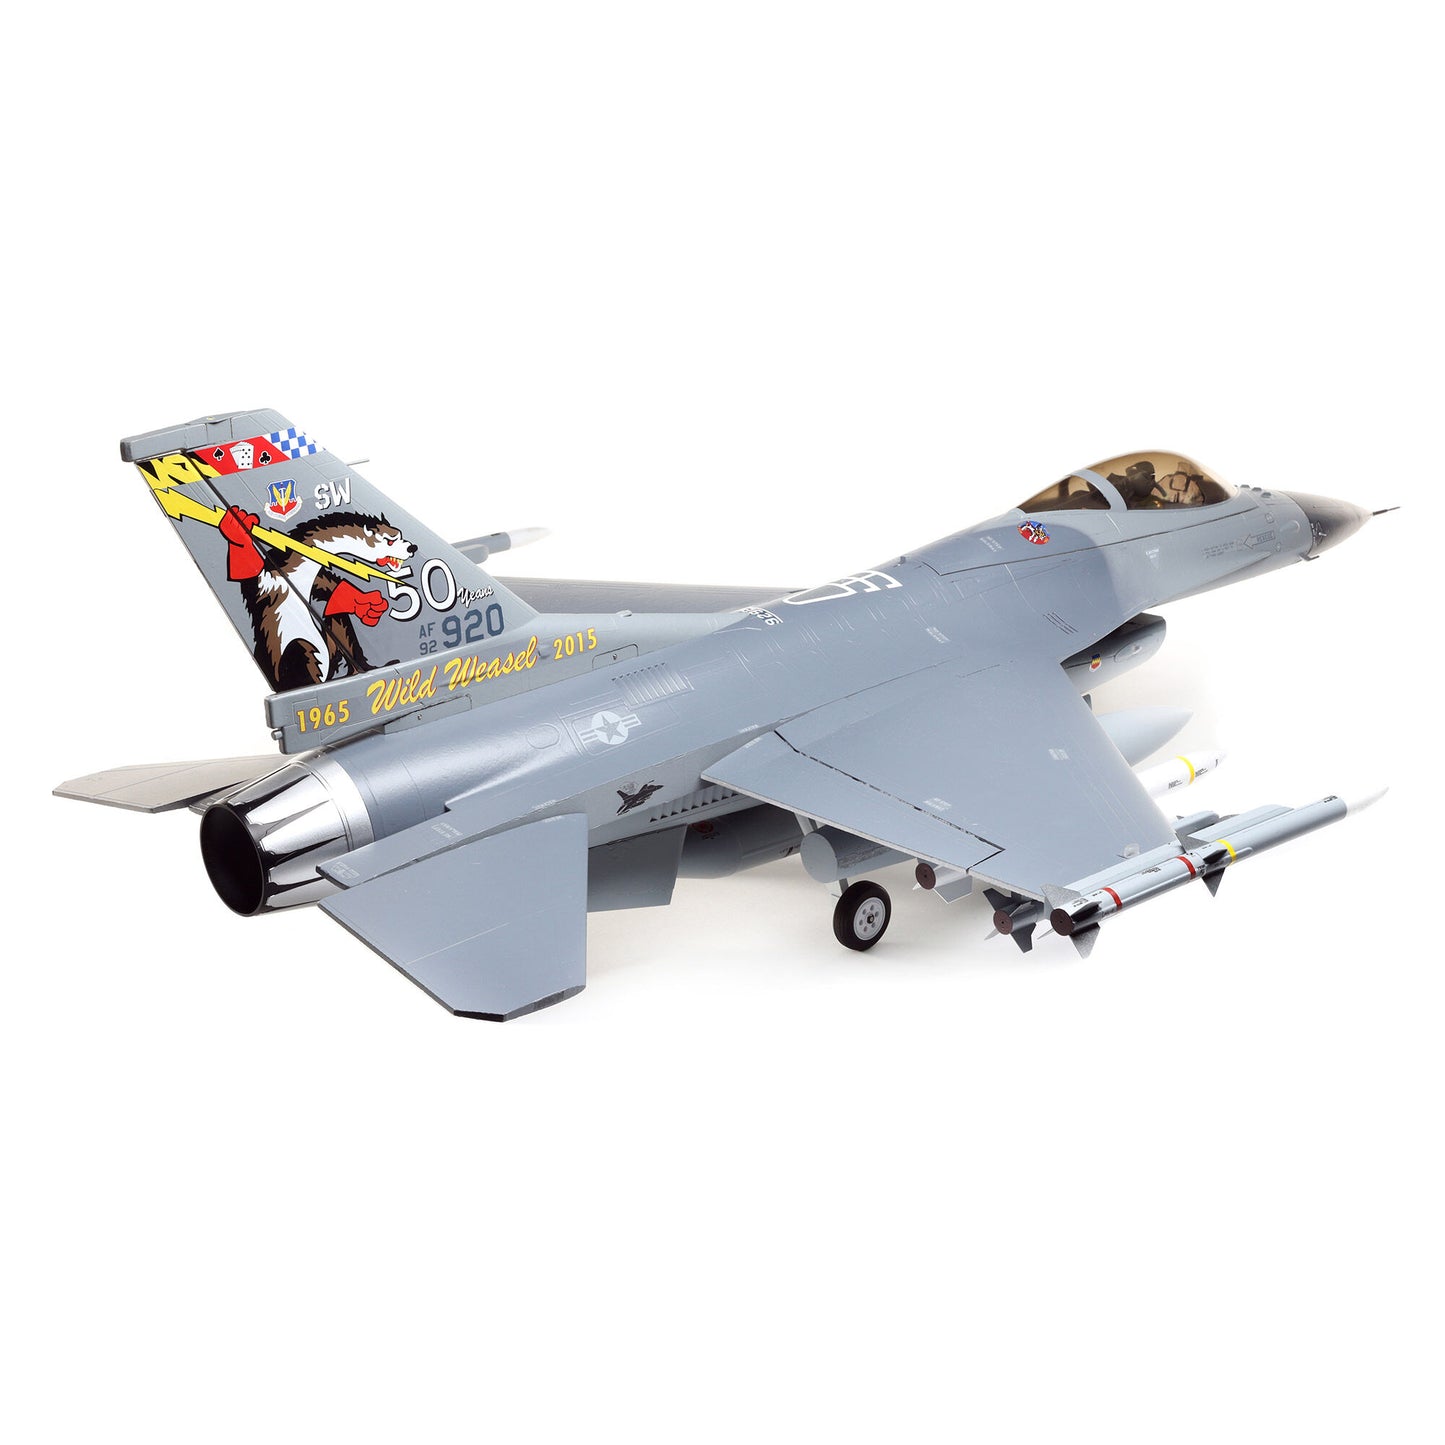 F-16 Falcon 80mm EDF Jet Smart BNF Basic with SAFE Select, 1000mm